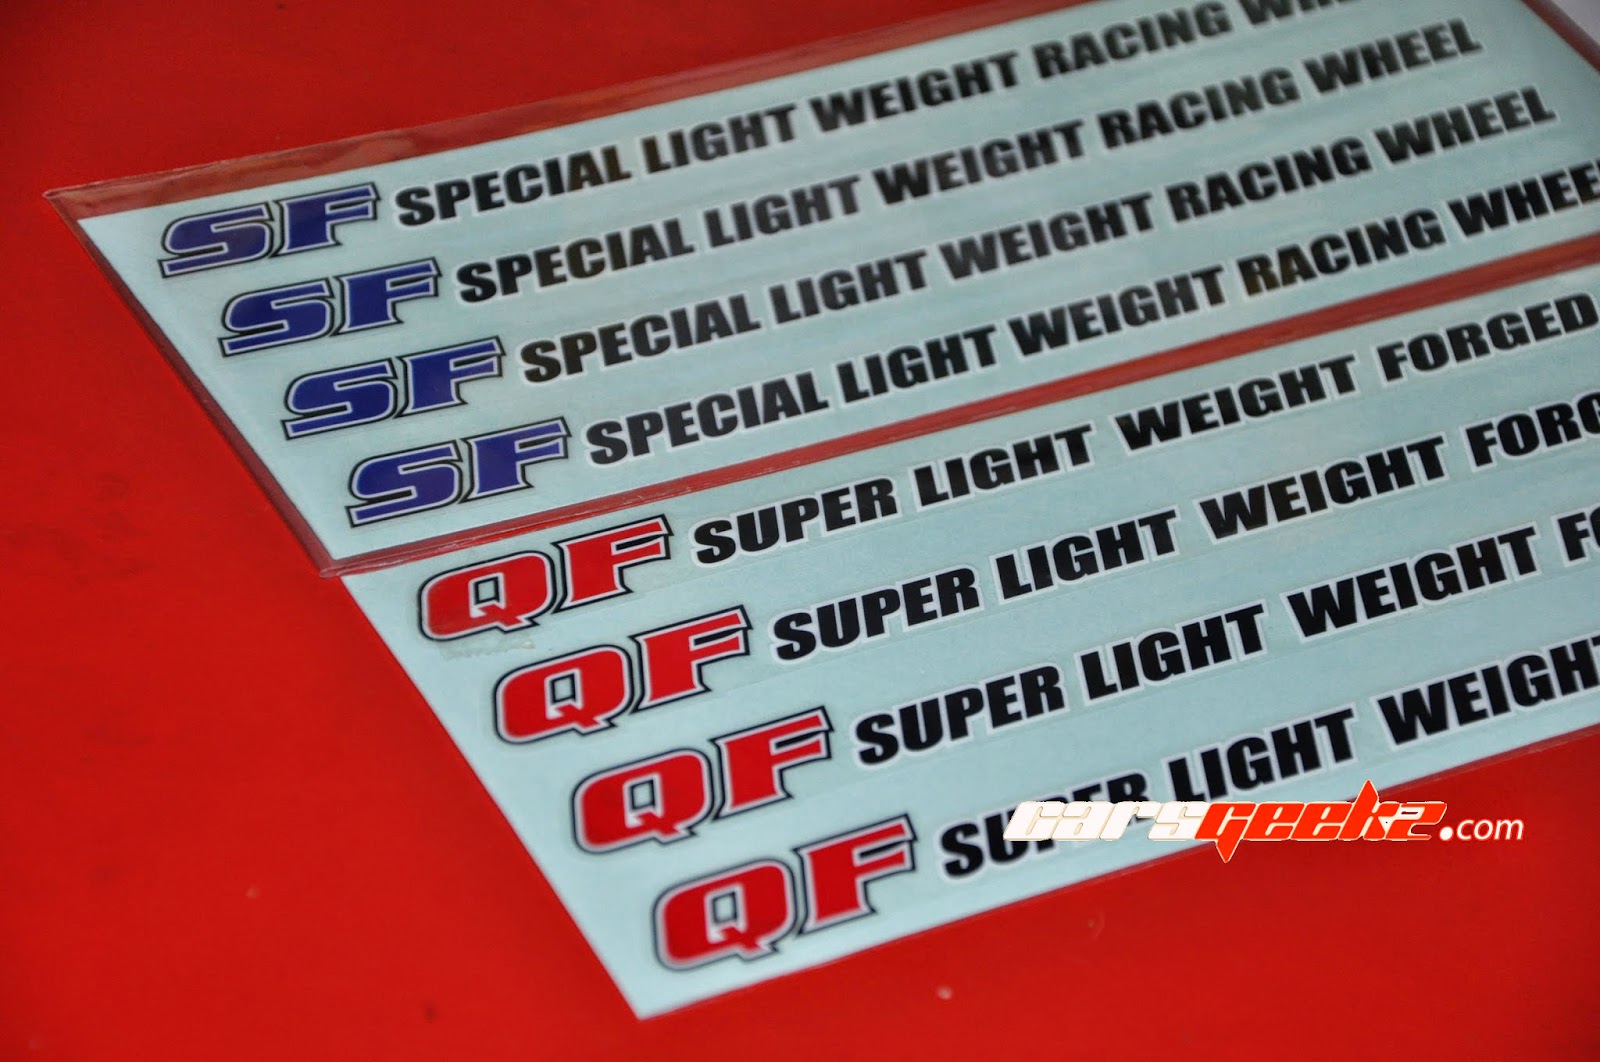 QF AND SUPER LIGHT WEIGHT FORGED RACING WHEEL P1 BUDDY CLUB  sticker / decal / vinyl